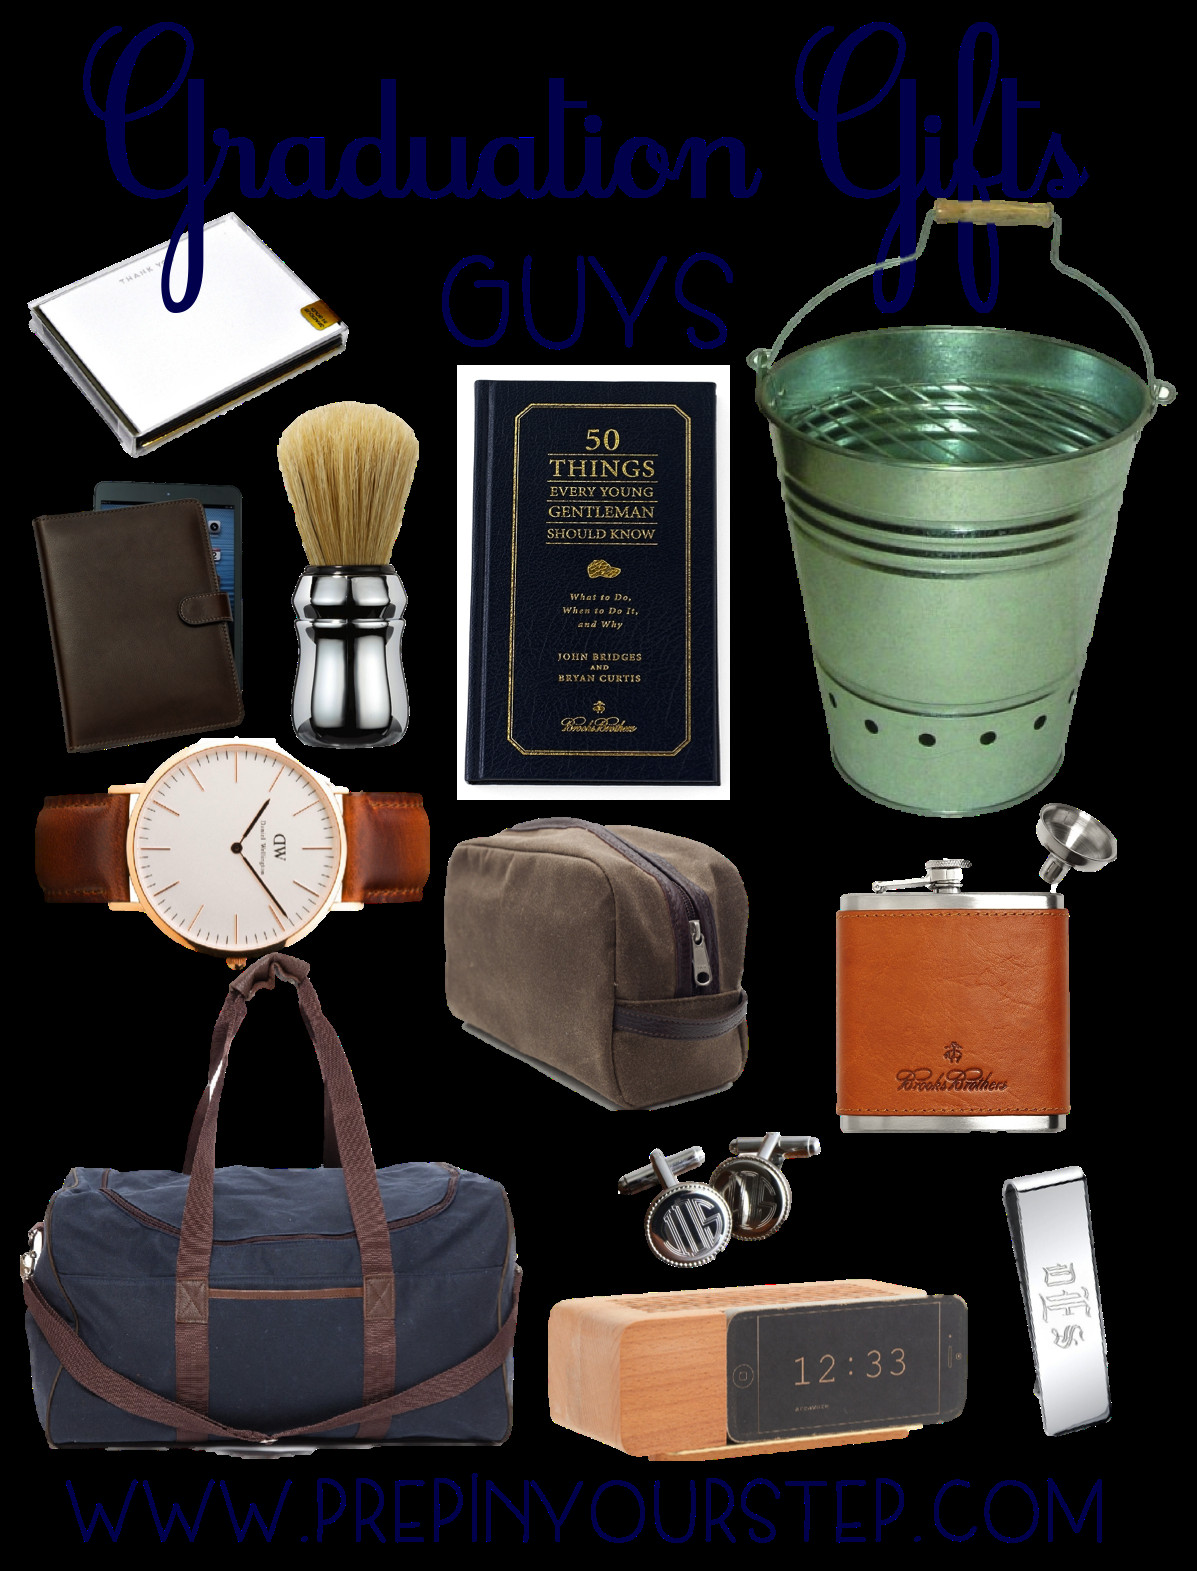 Graduation Gift Ideas For Him
 Prep In Your Step Graduation Gift Ideas Guys & Girls